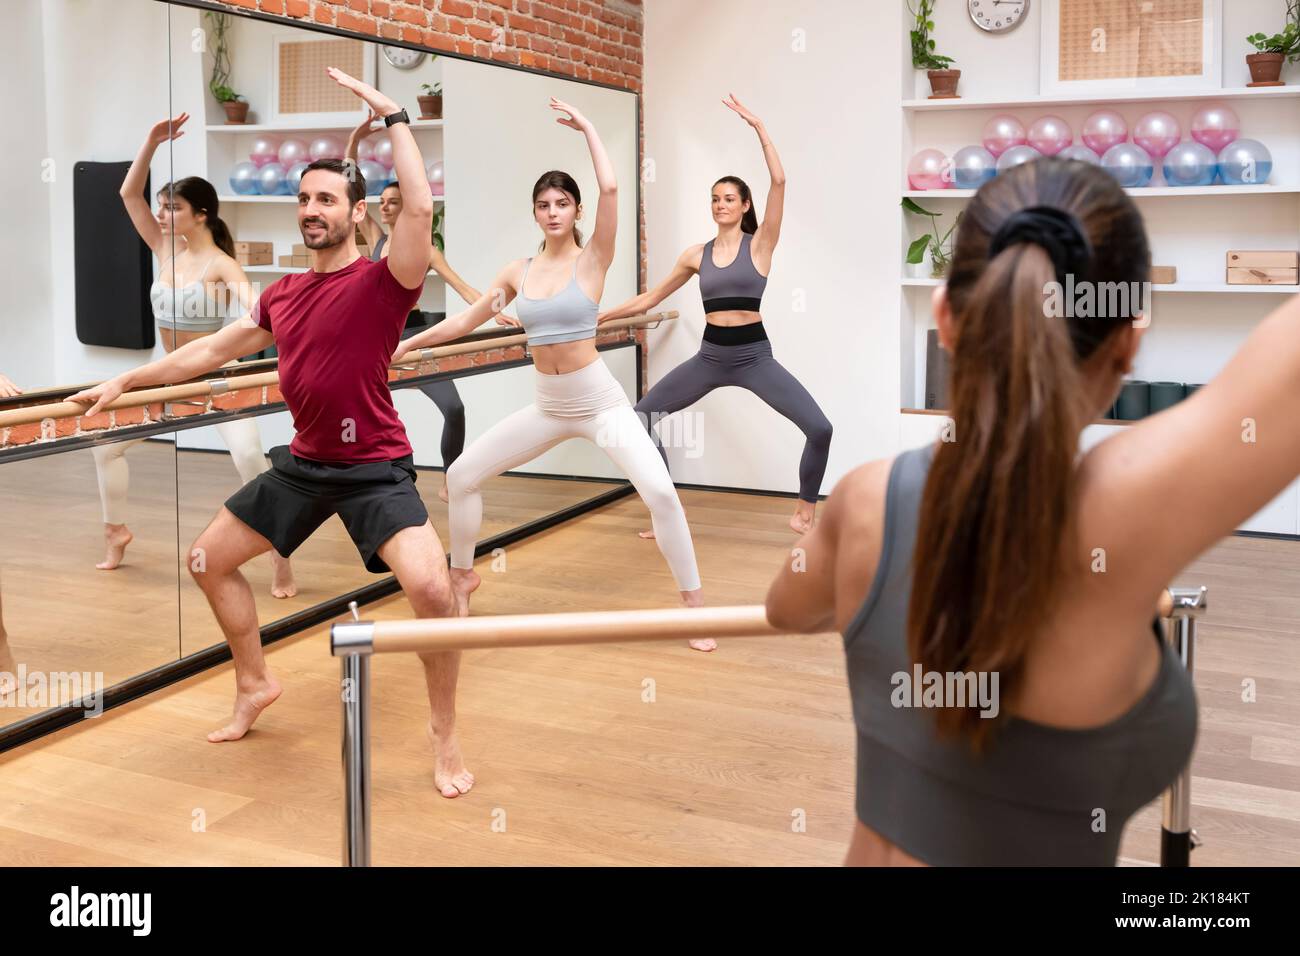 Group of fit people in activewear performing plie squat releve on barre together during class in light studio with mirror Stock Photo